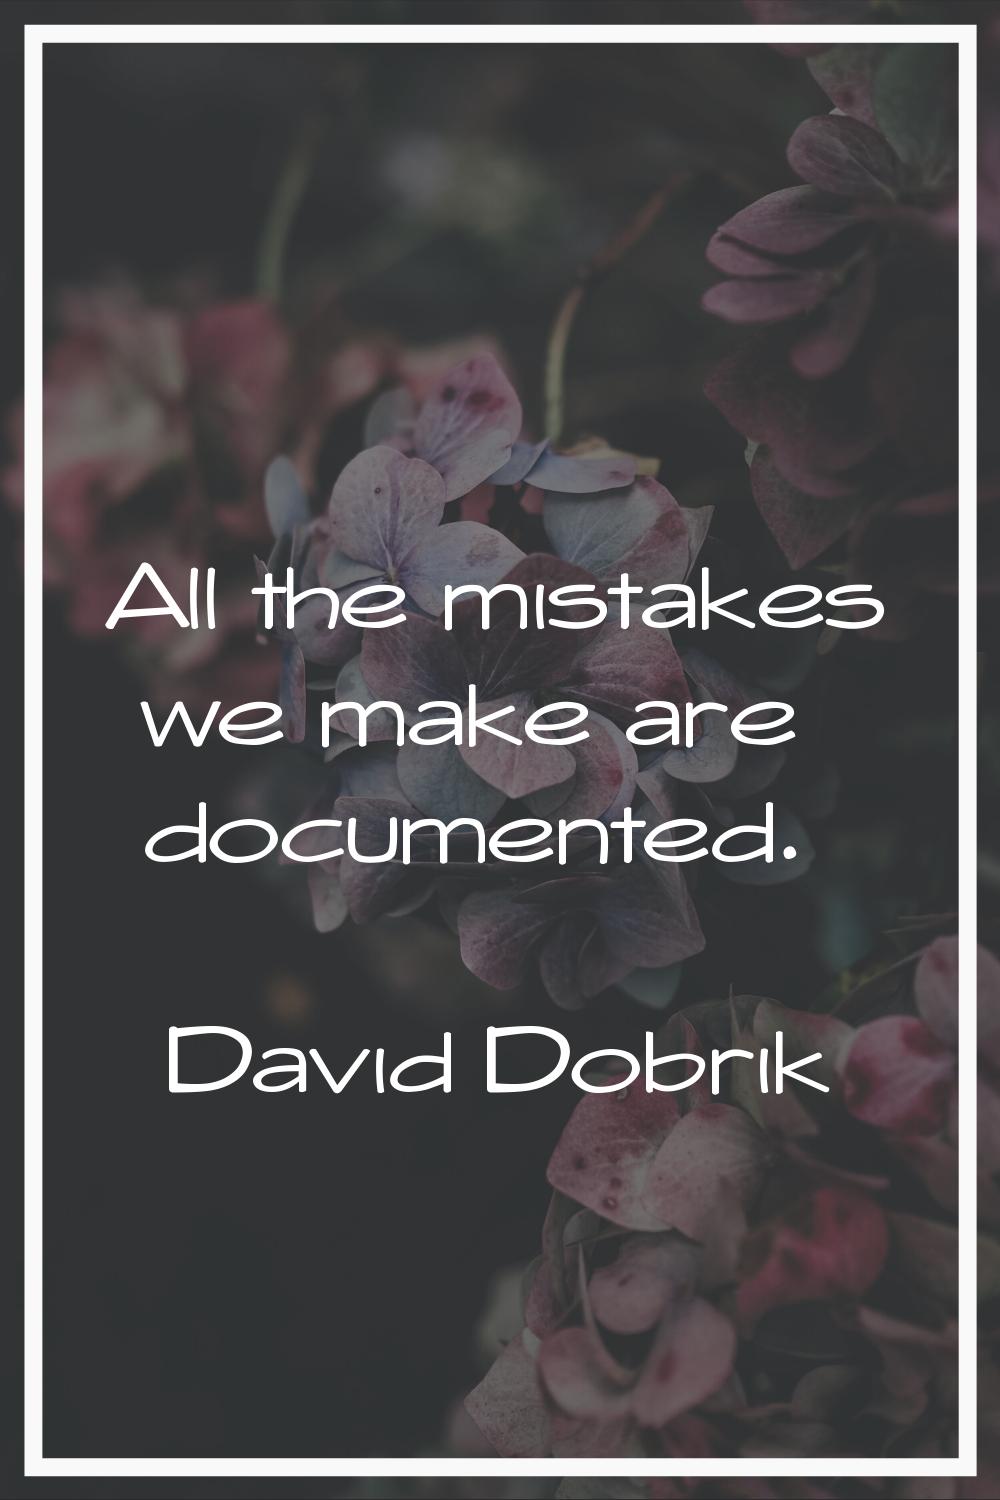 All the mistakes we make are documented.